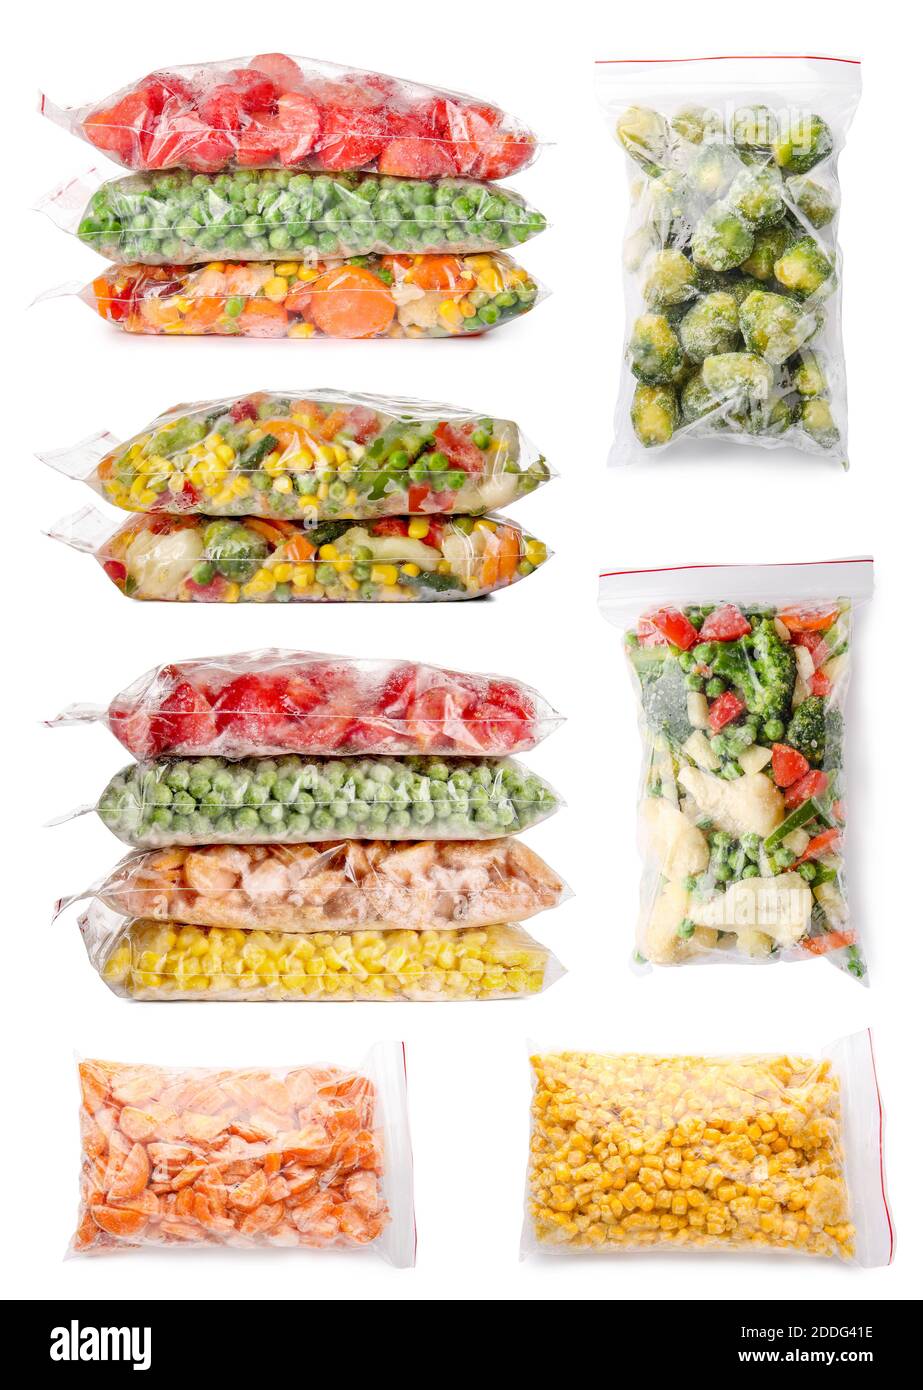 Collage of different frozen vegetables on white background Stock Photo